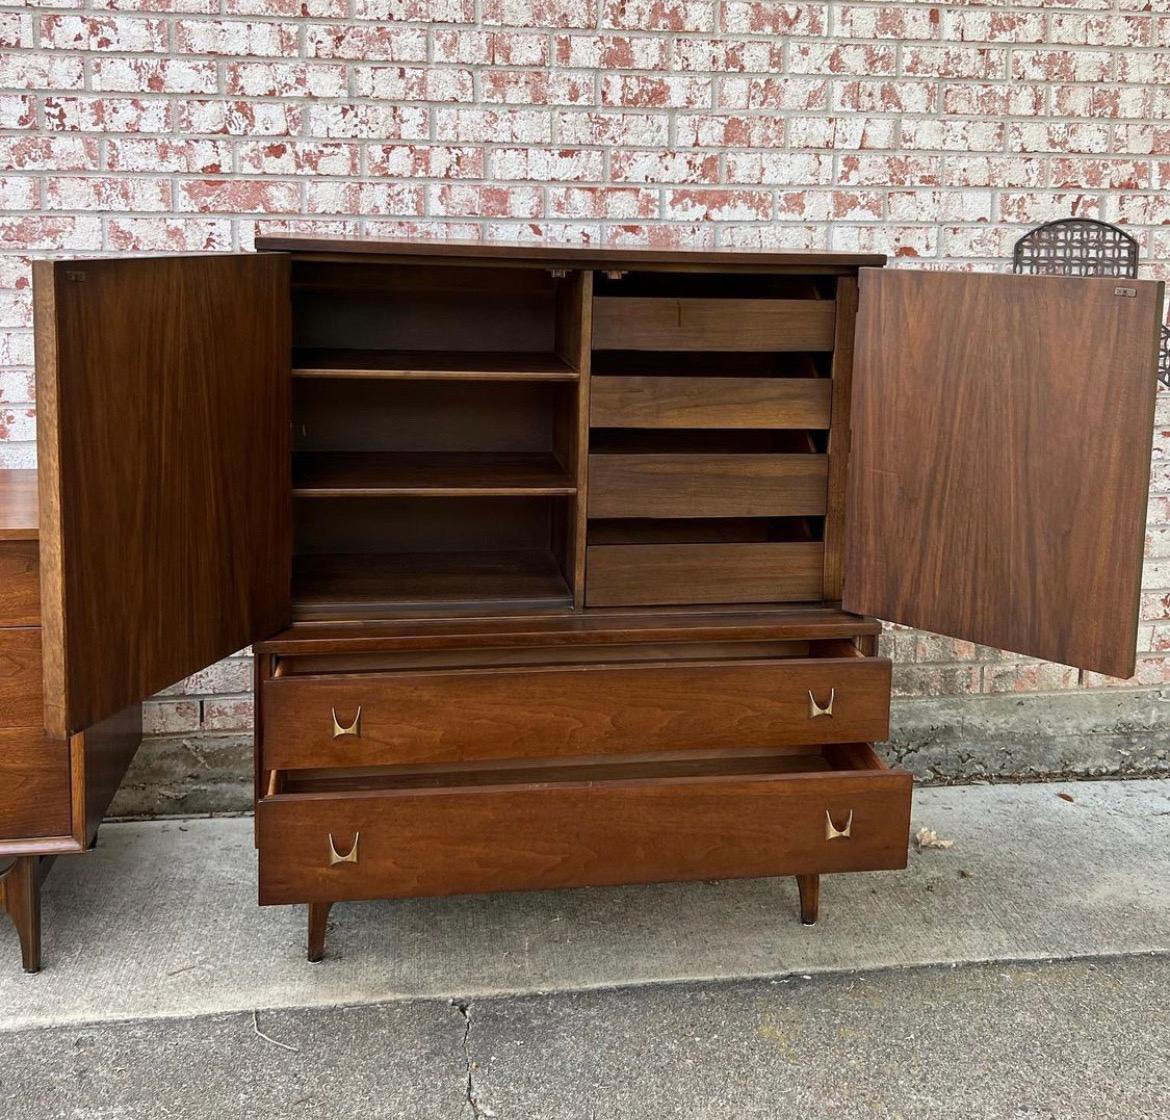 This is an amazing Broyhill Brasilia high boy. It includes 6 drawers. This collection features large, swooping wood accents and brass drawer pulls. This is a very well built set and it has been recently tuned up too! The drawers are dove-tailed. The